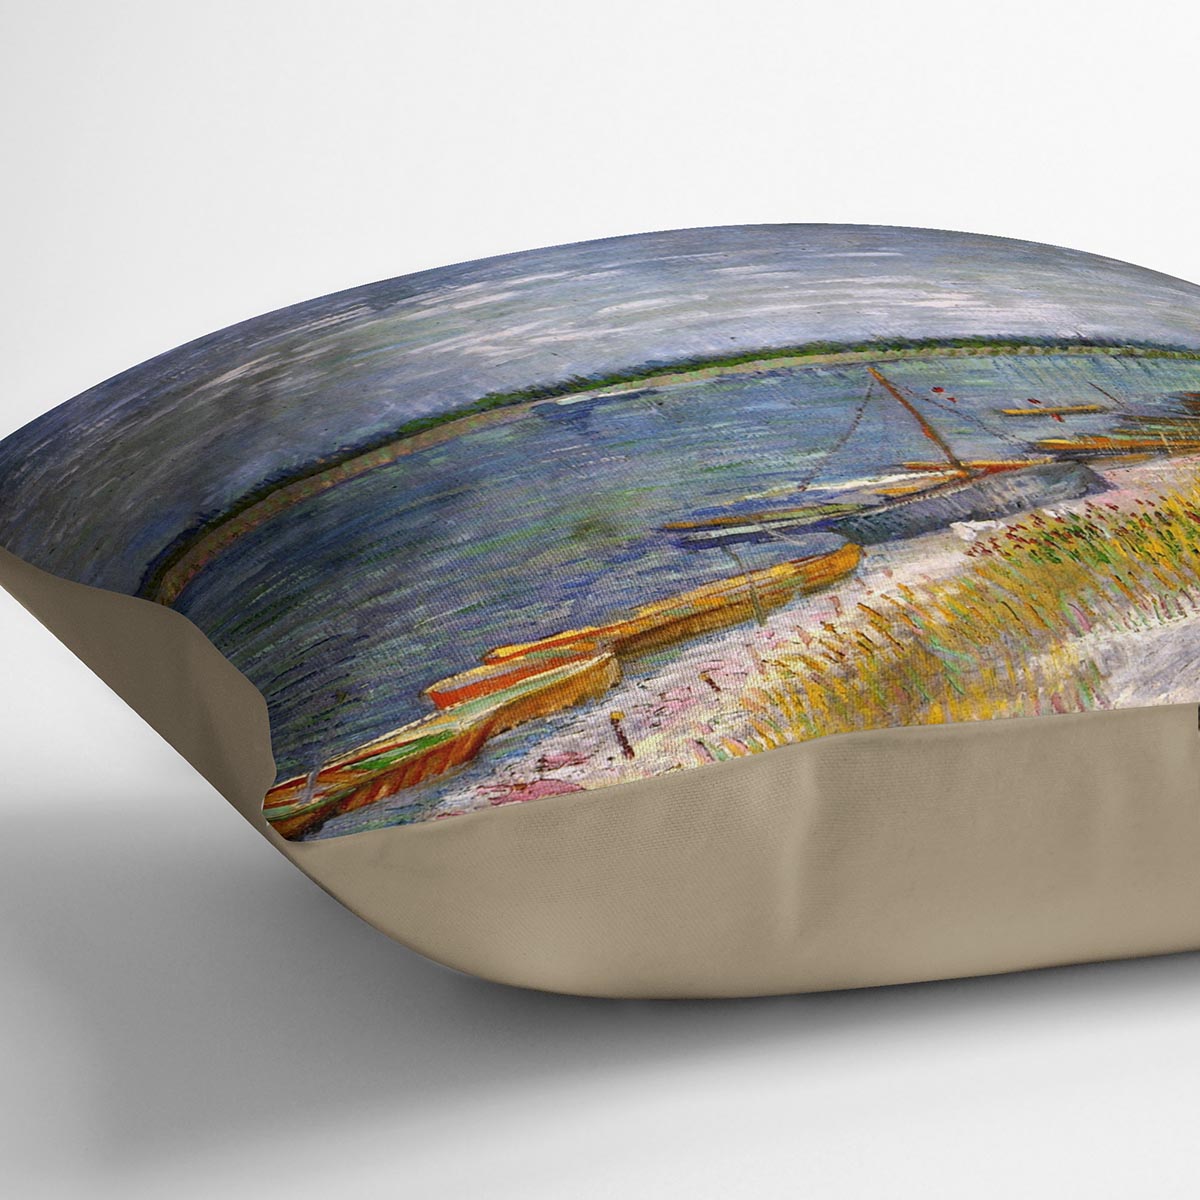 View of a River with Rowing Boats by Van Gogh Cushion